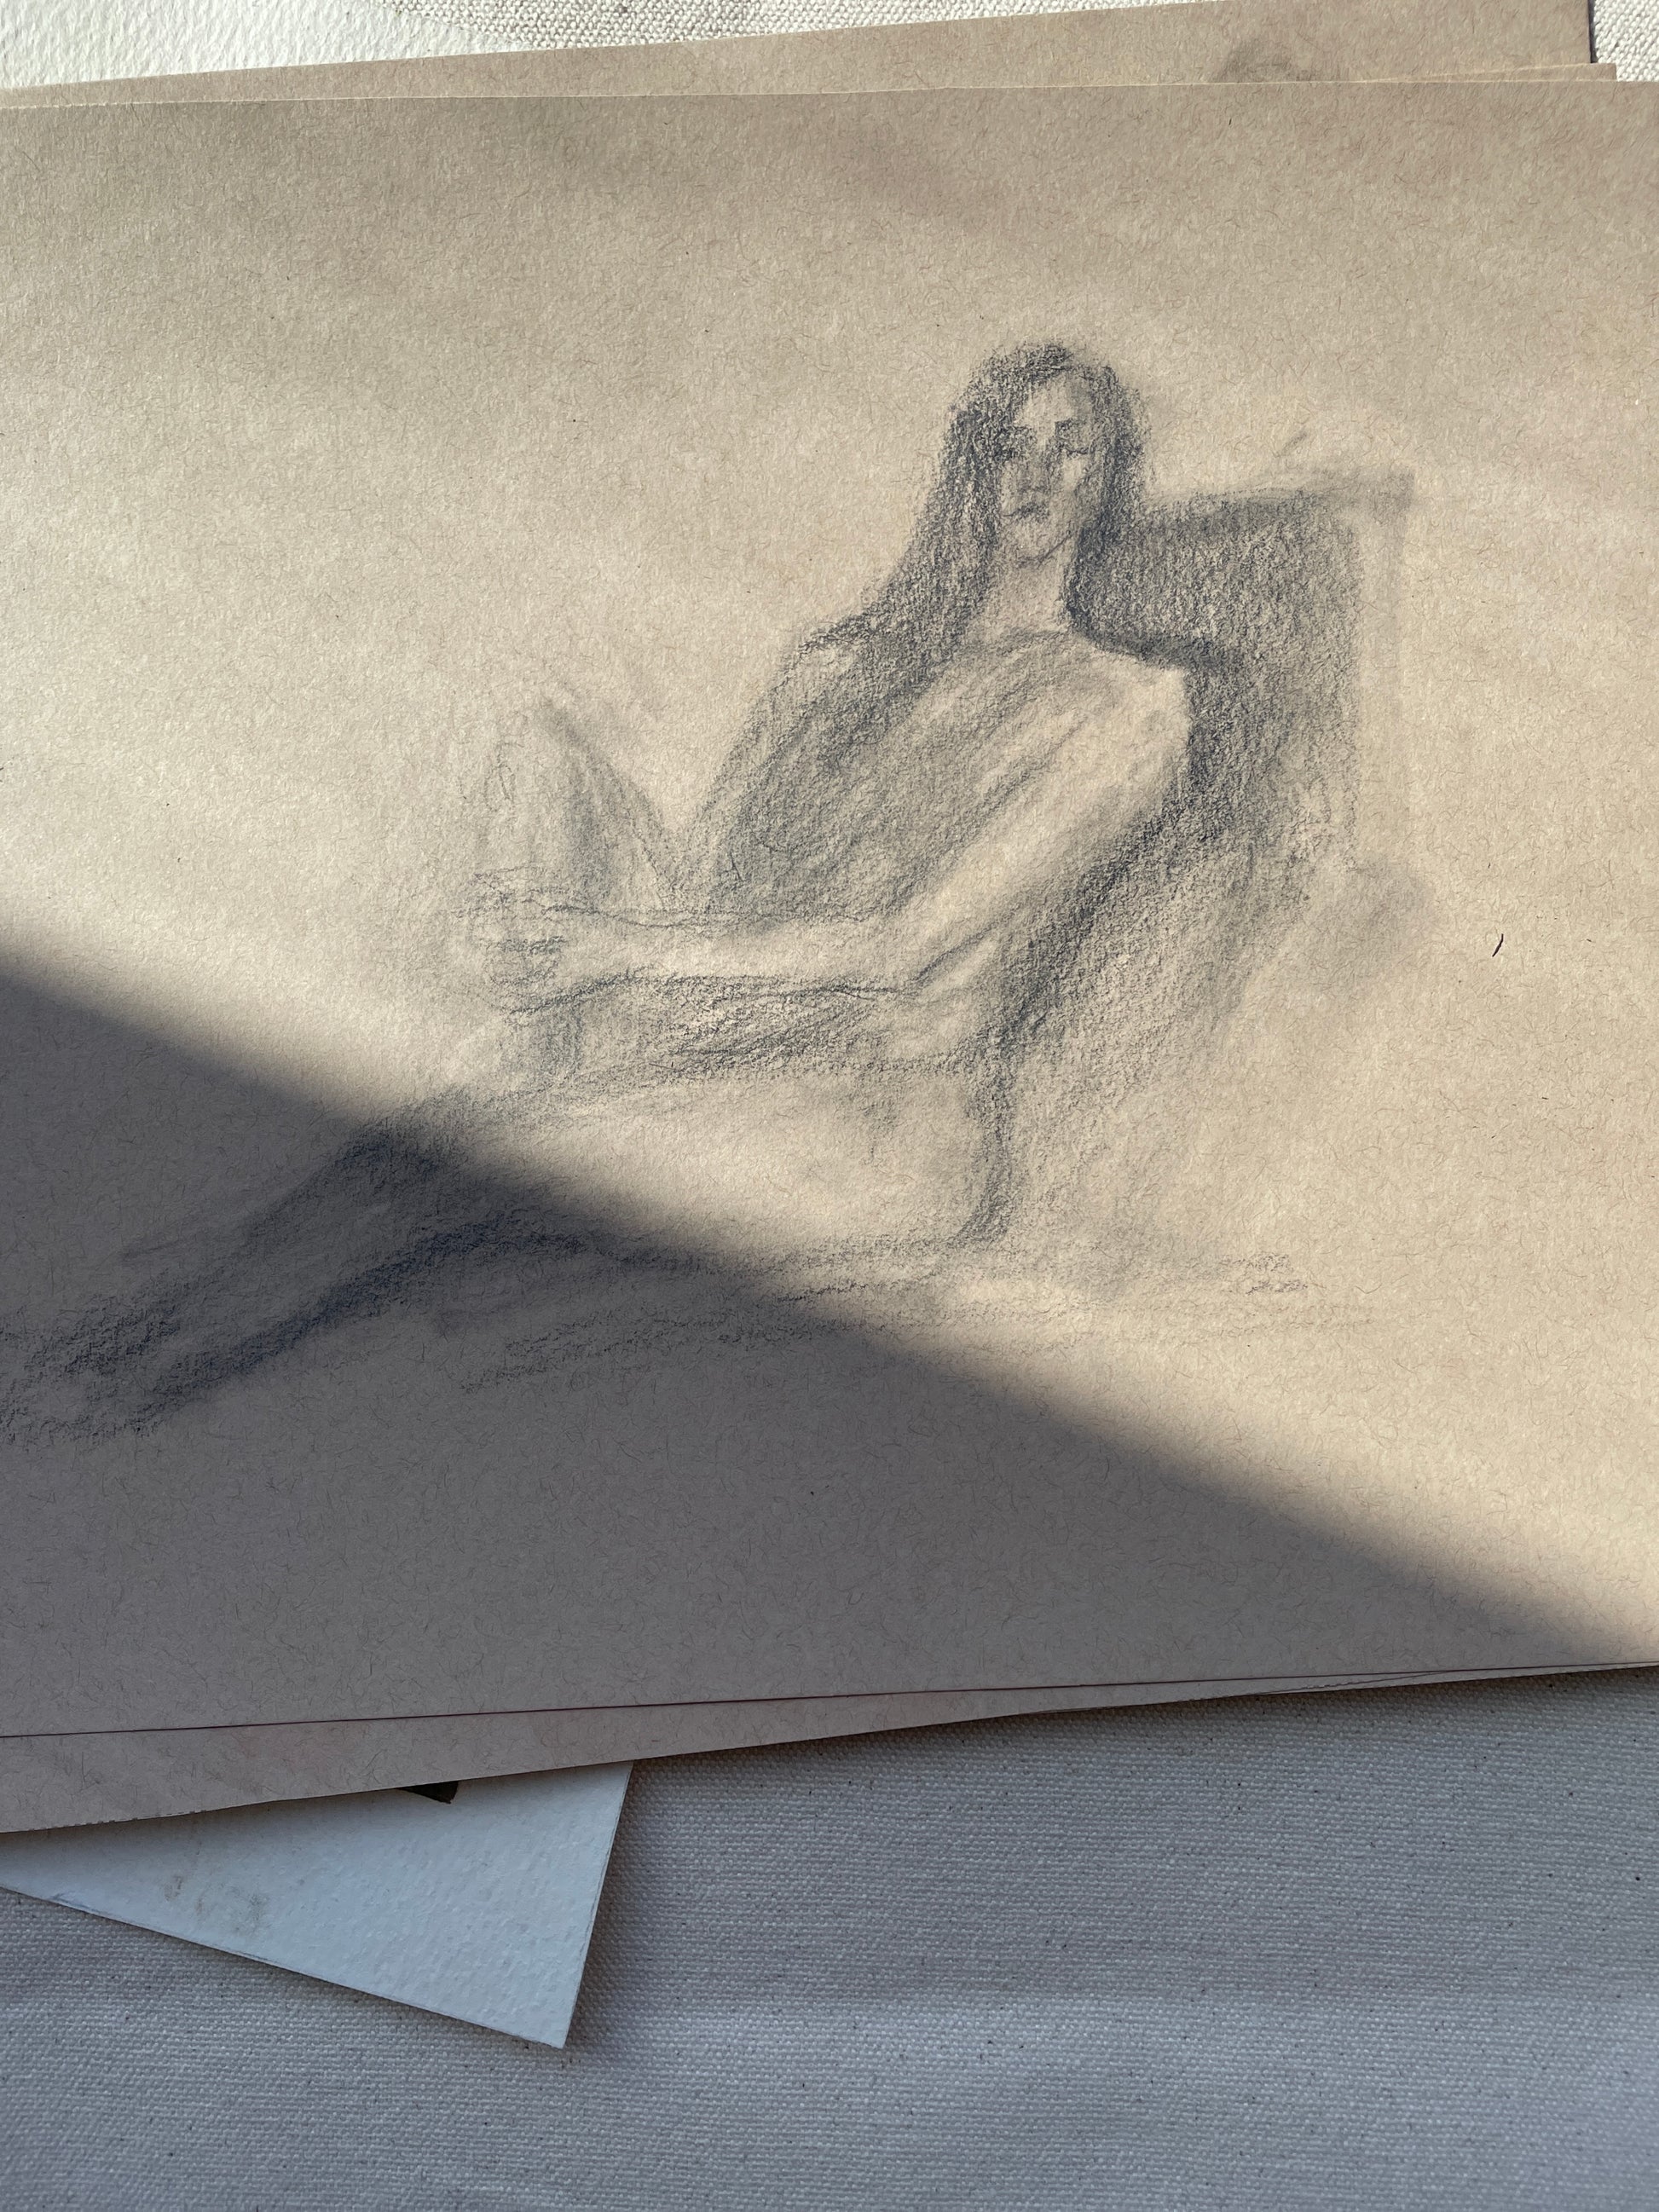 Sketch art of a seated woman with graphite pencil